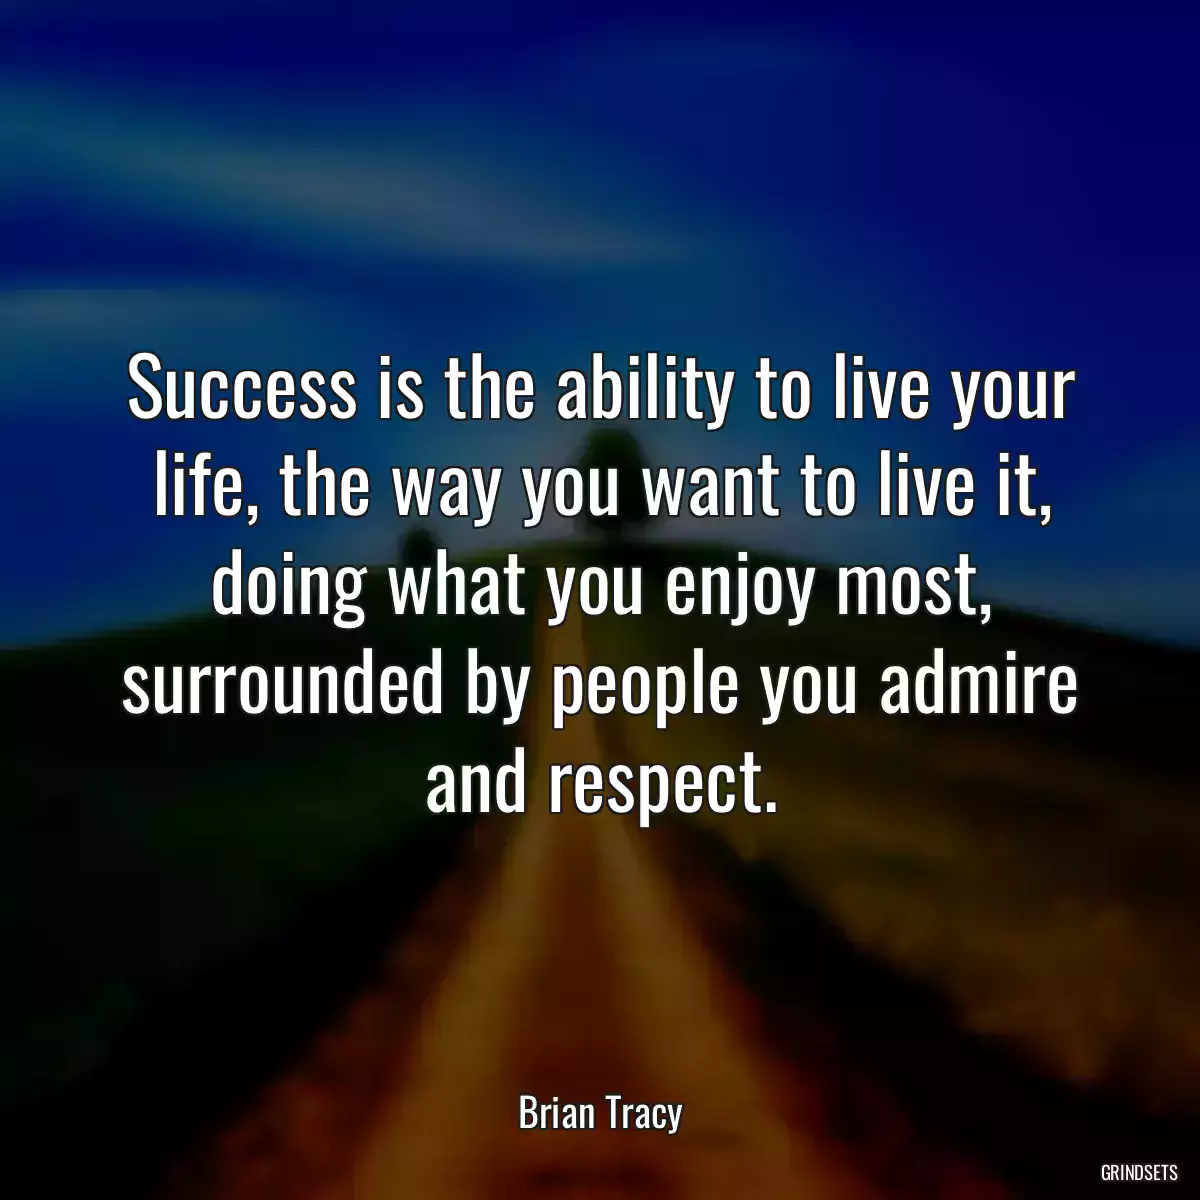 Success is the ability to live your life, the way you want to live it, doing what you enjoy most, surrounded by people you admire and respect.